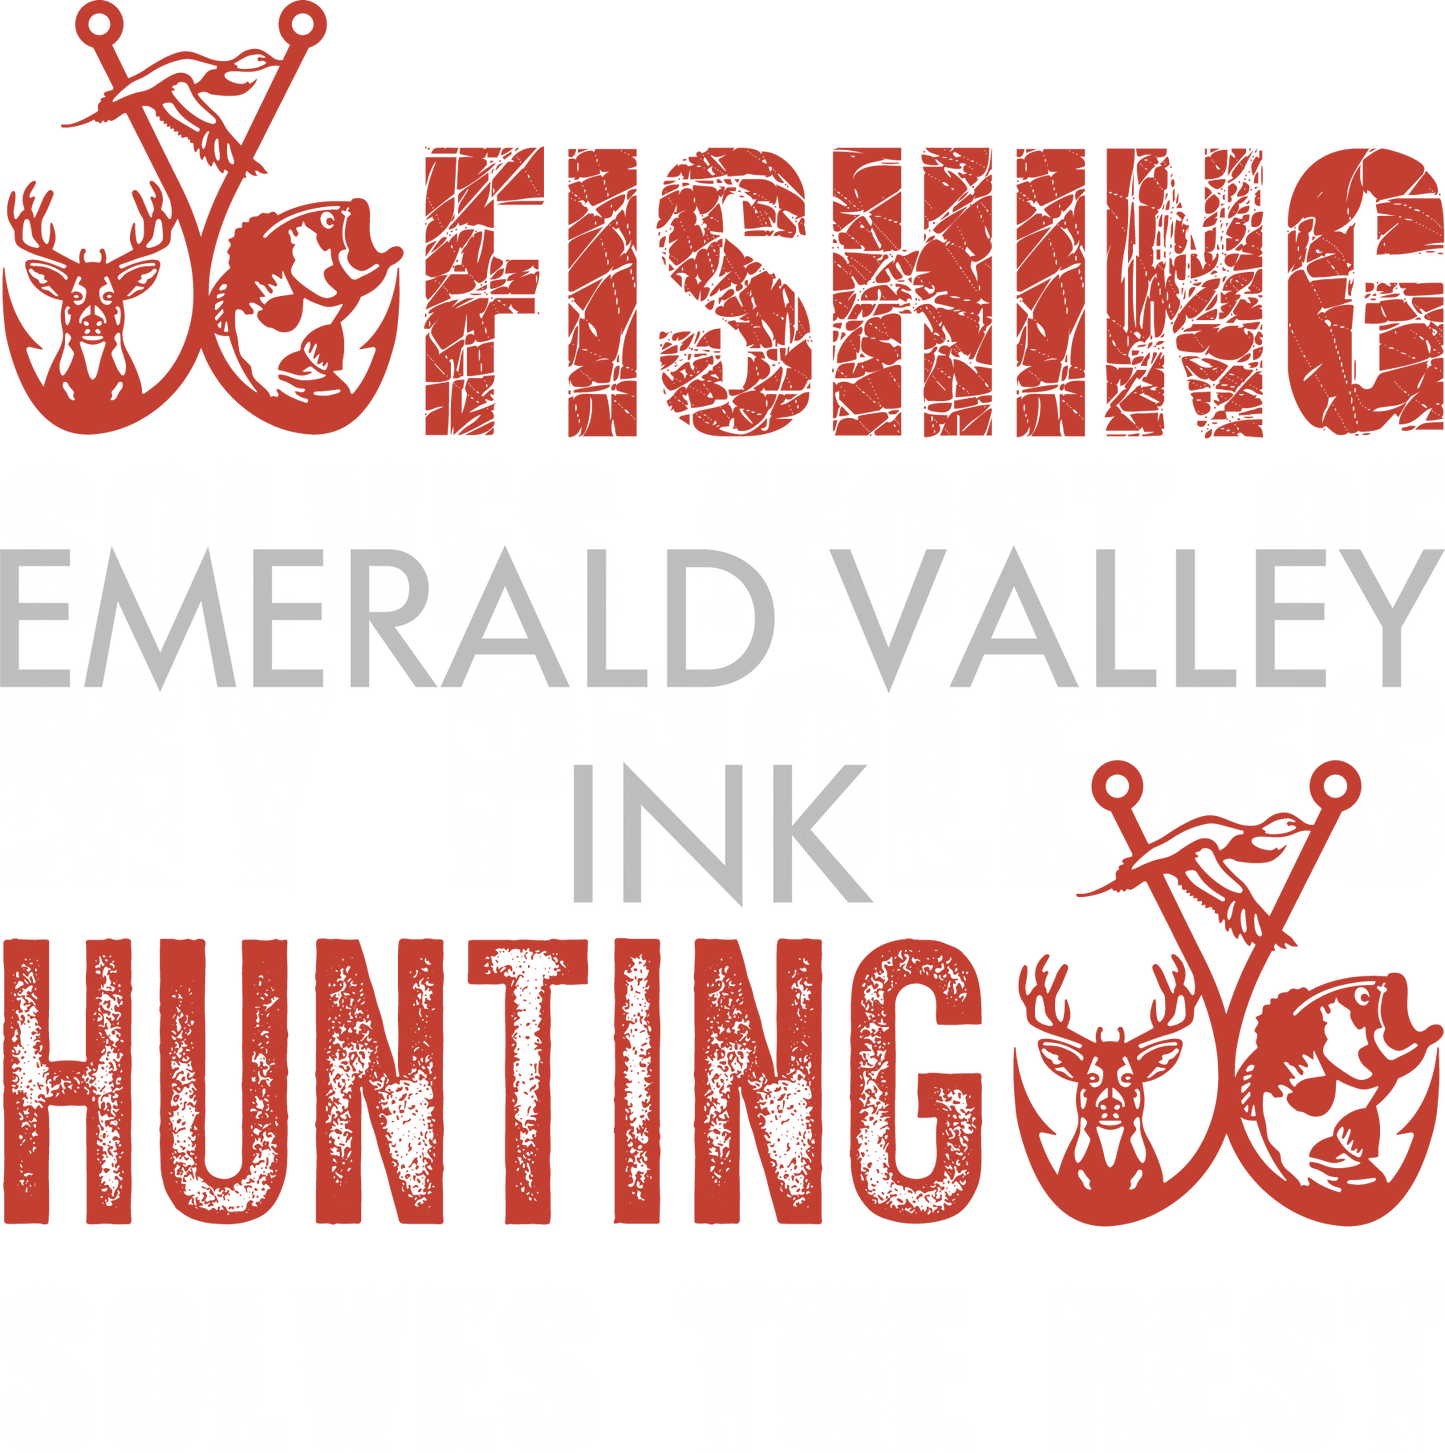 Fishing Solves Most of My Problems, Hunting Solves the Rest